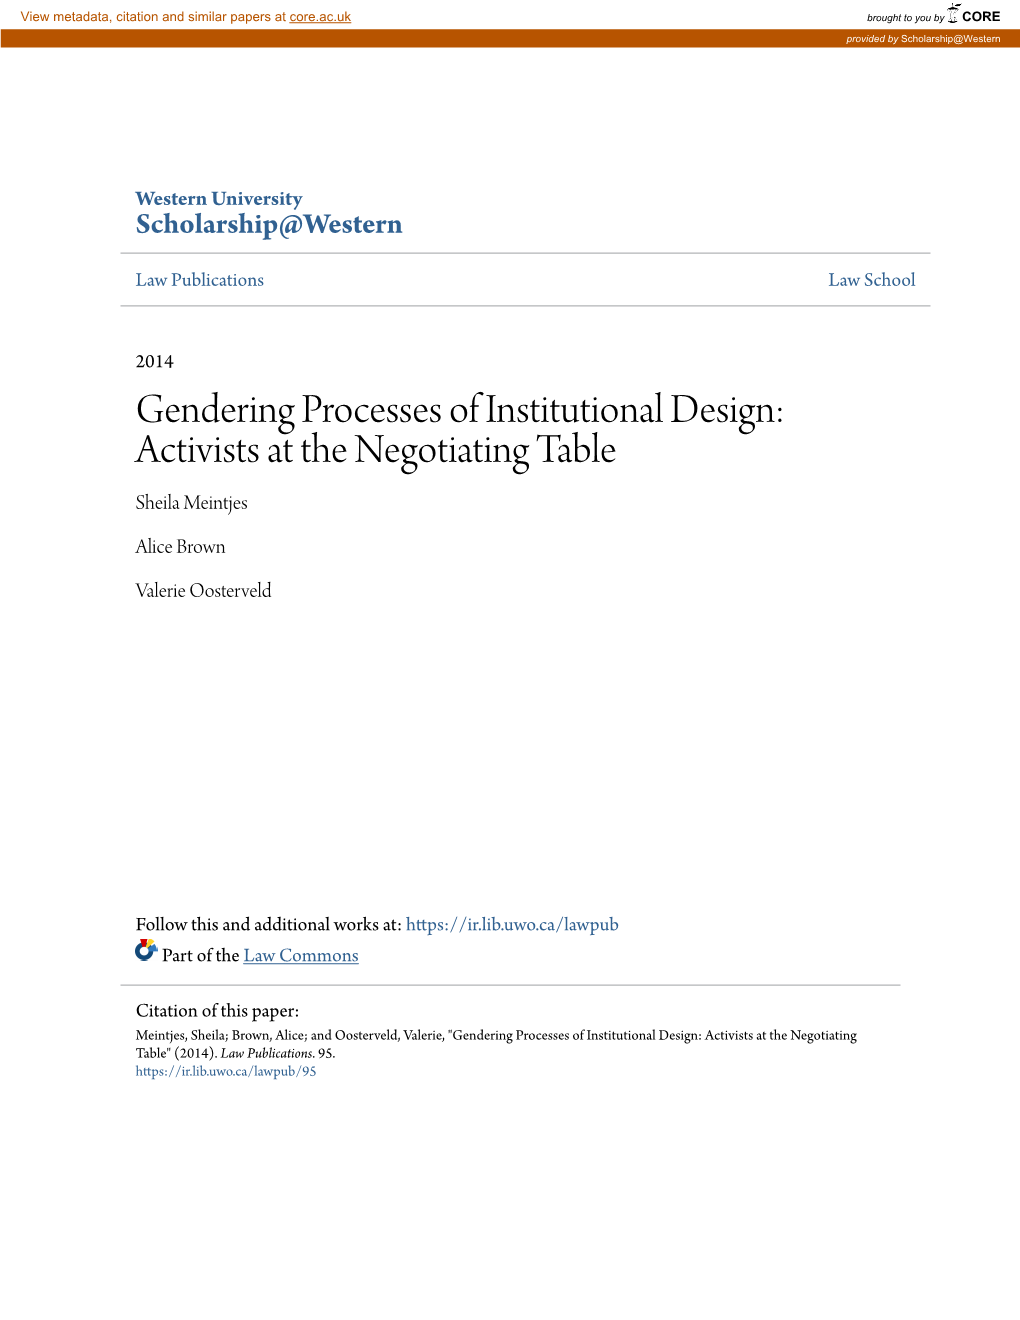 Gendering Processes of Institutional Design: Activists at the Negotiating Table Sheila Meintjes